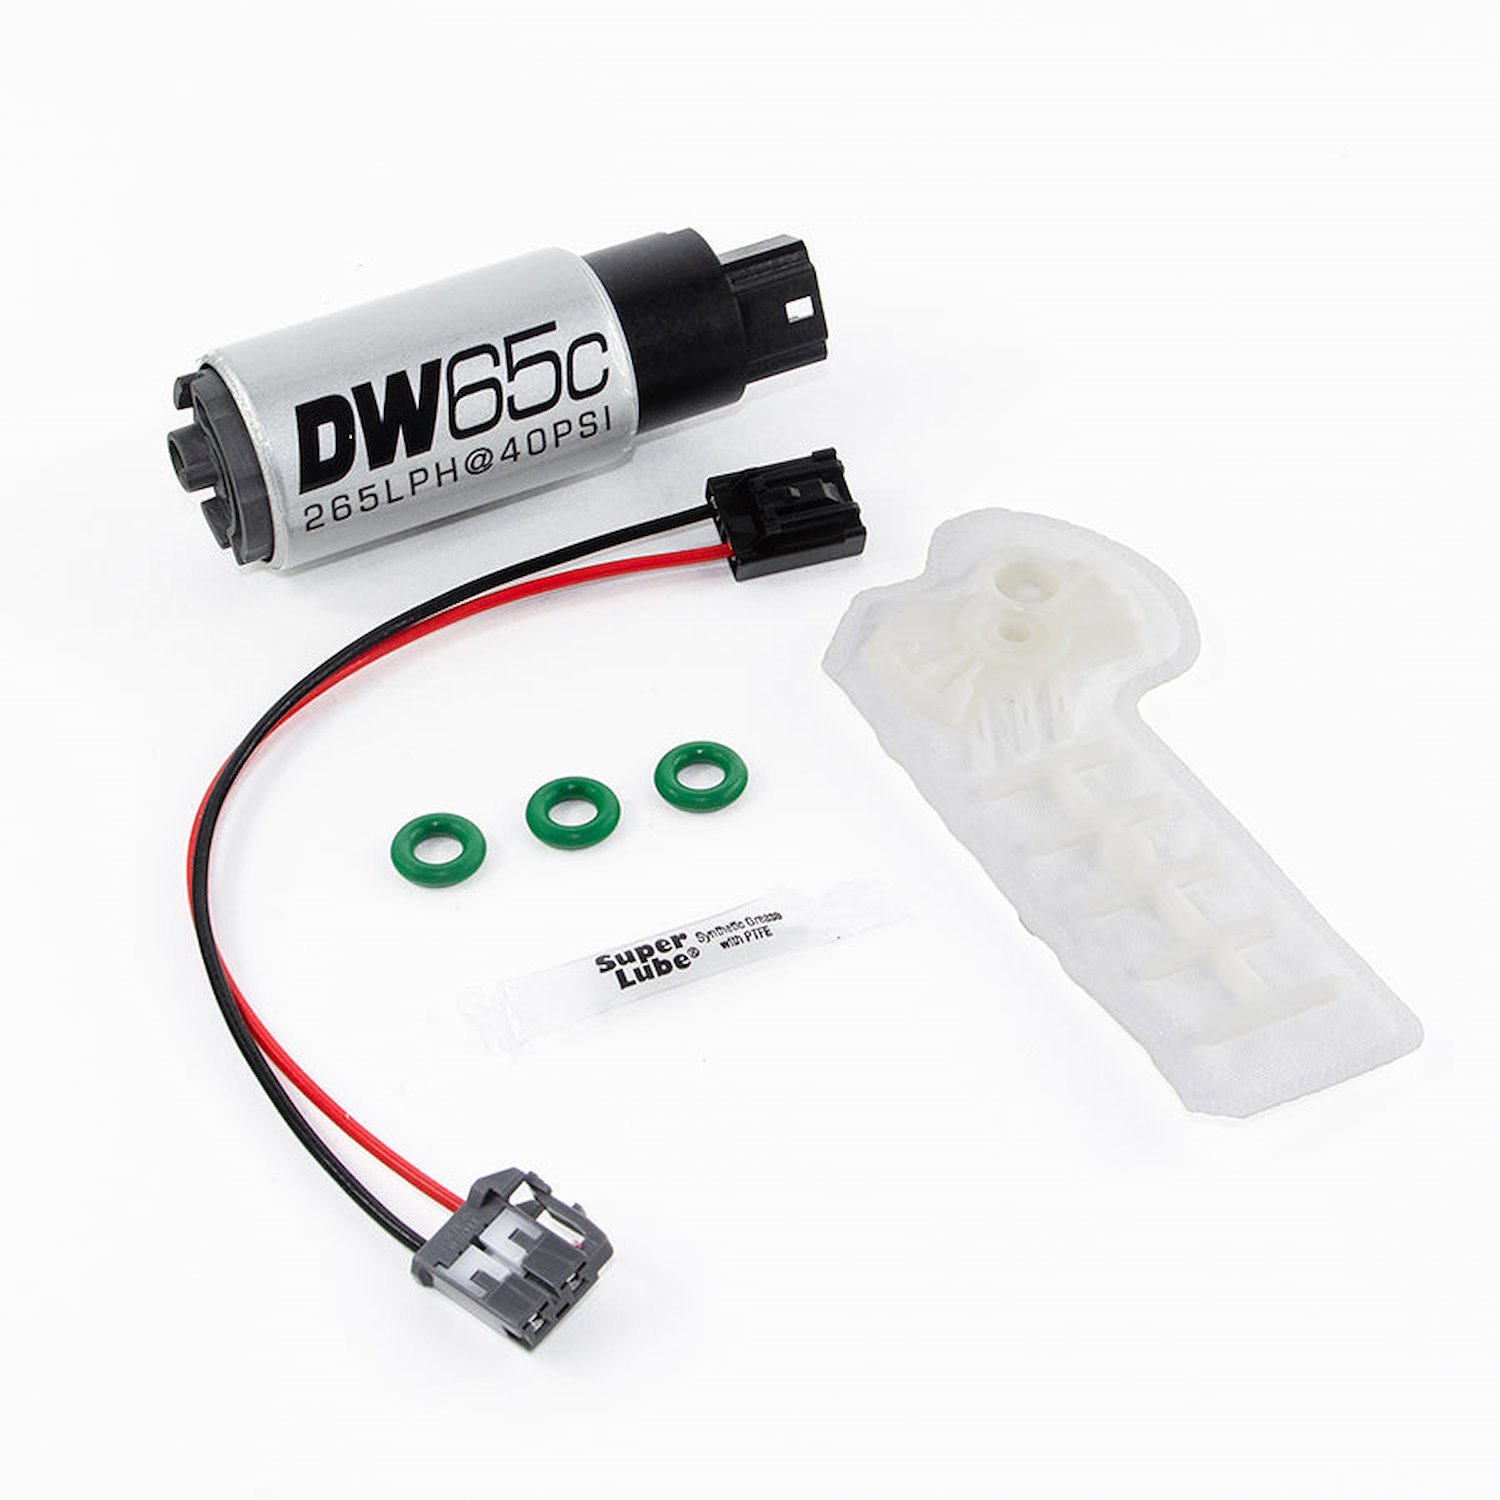 96511010 DW65C Series 265lph Compact Fuel Pump (in-tank) without mounting clips with Install Kit